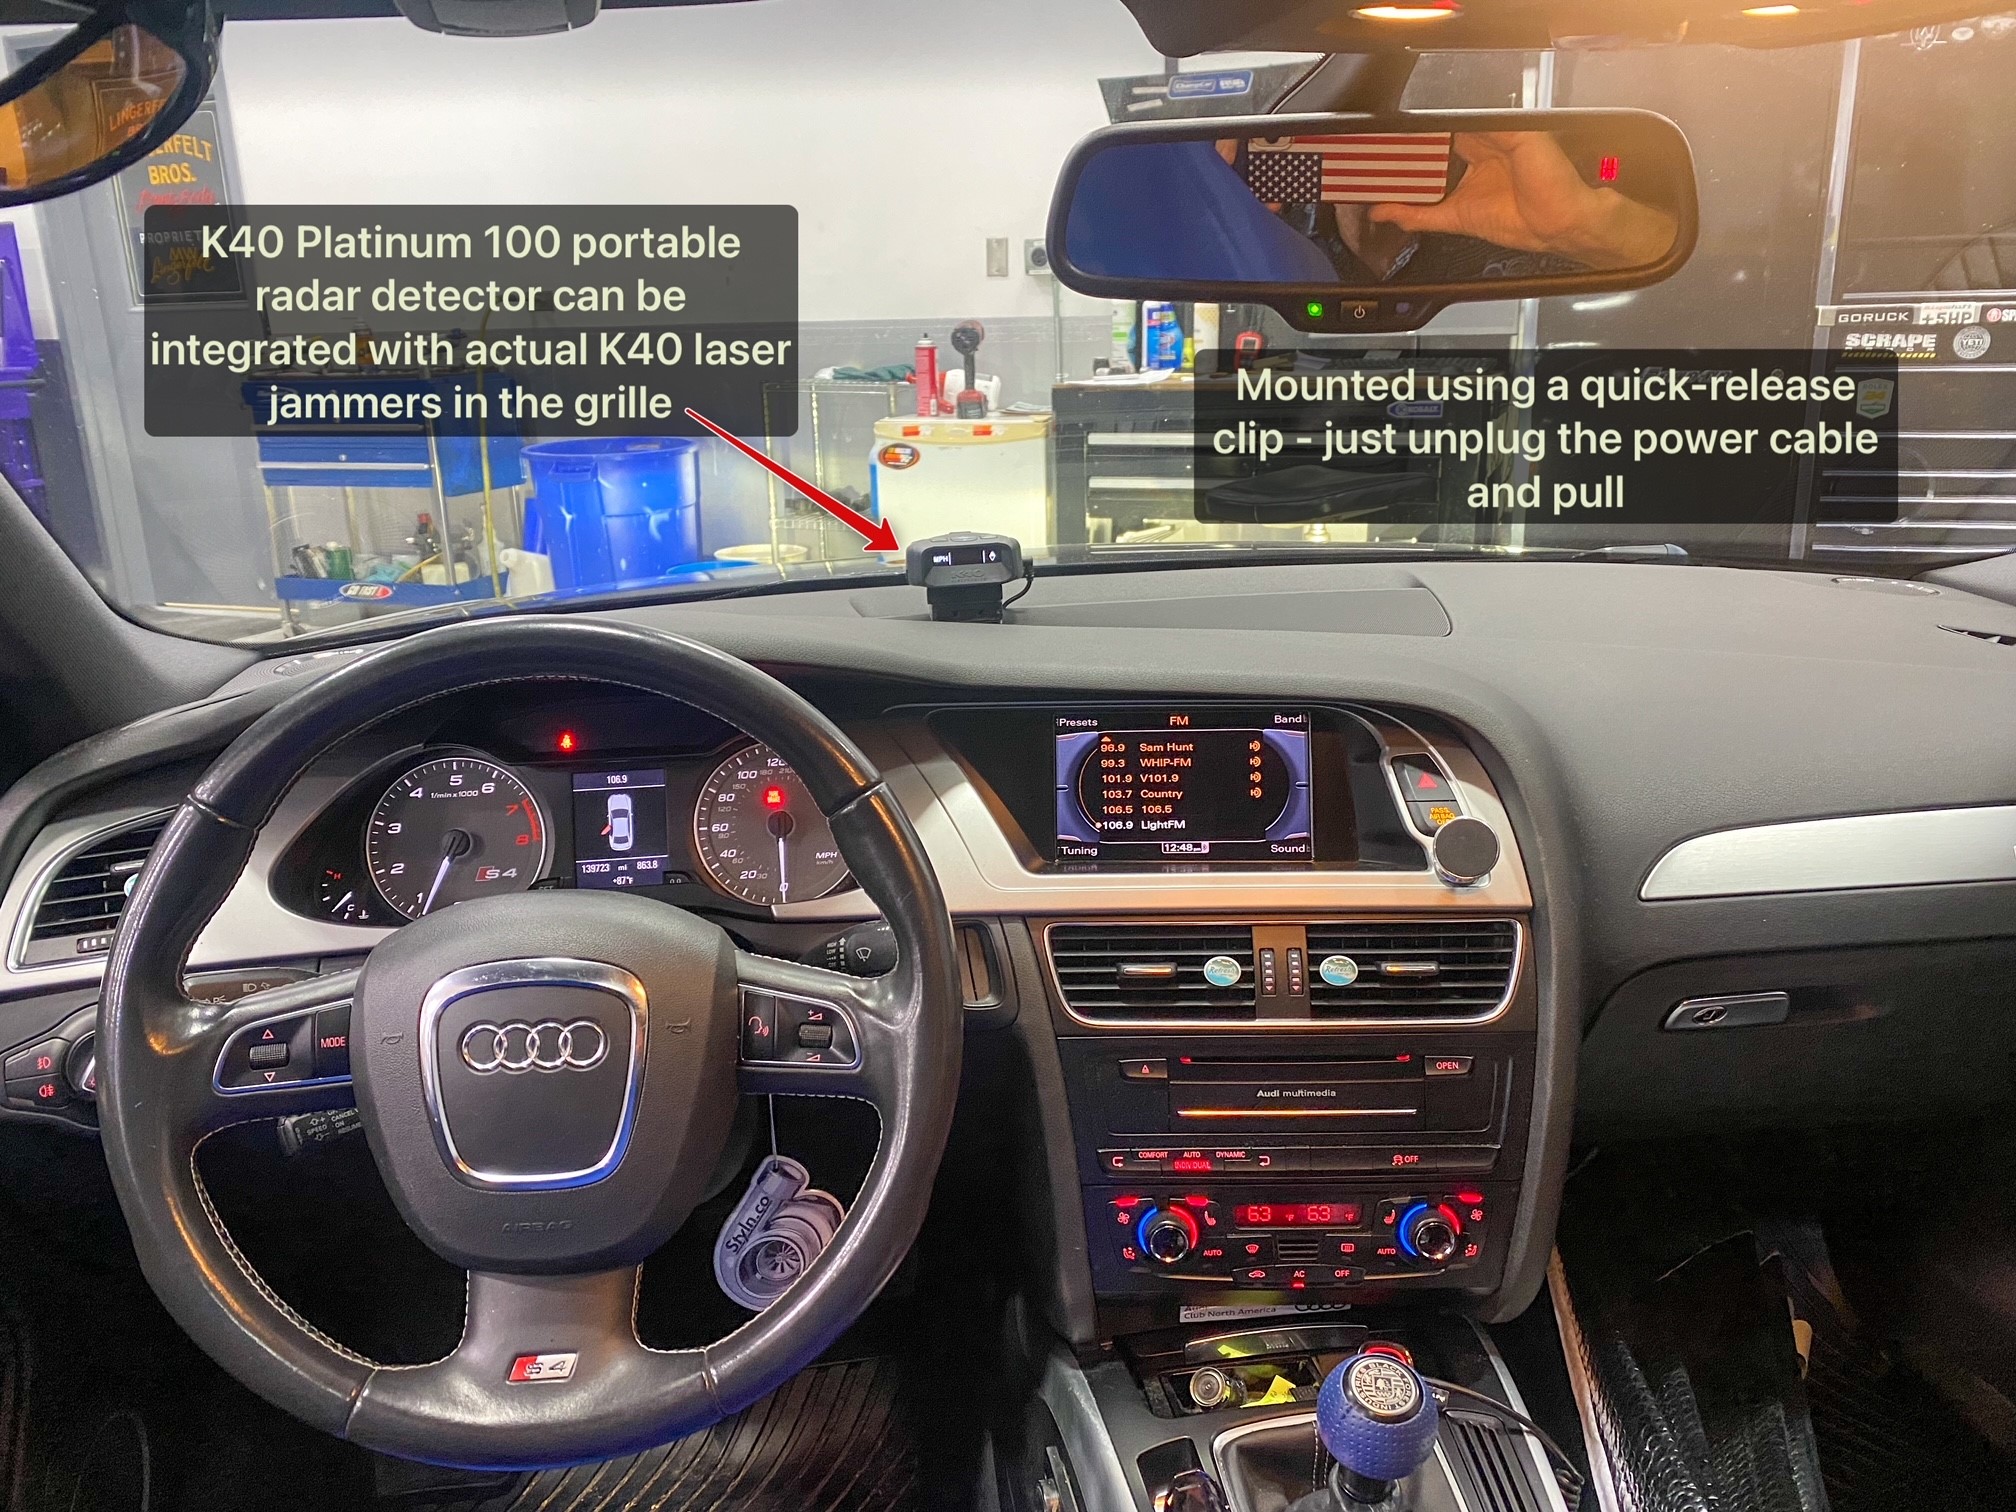 2012 audi s4 dash image with words about a k40 platinum100 radar and laser detector